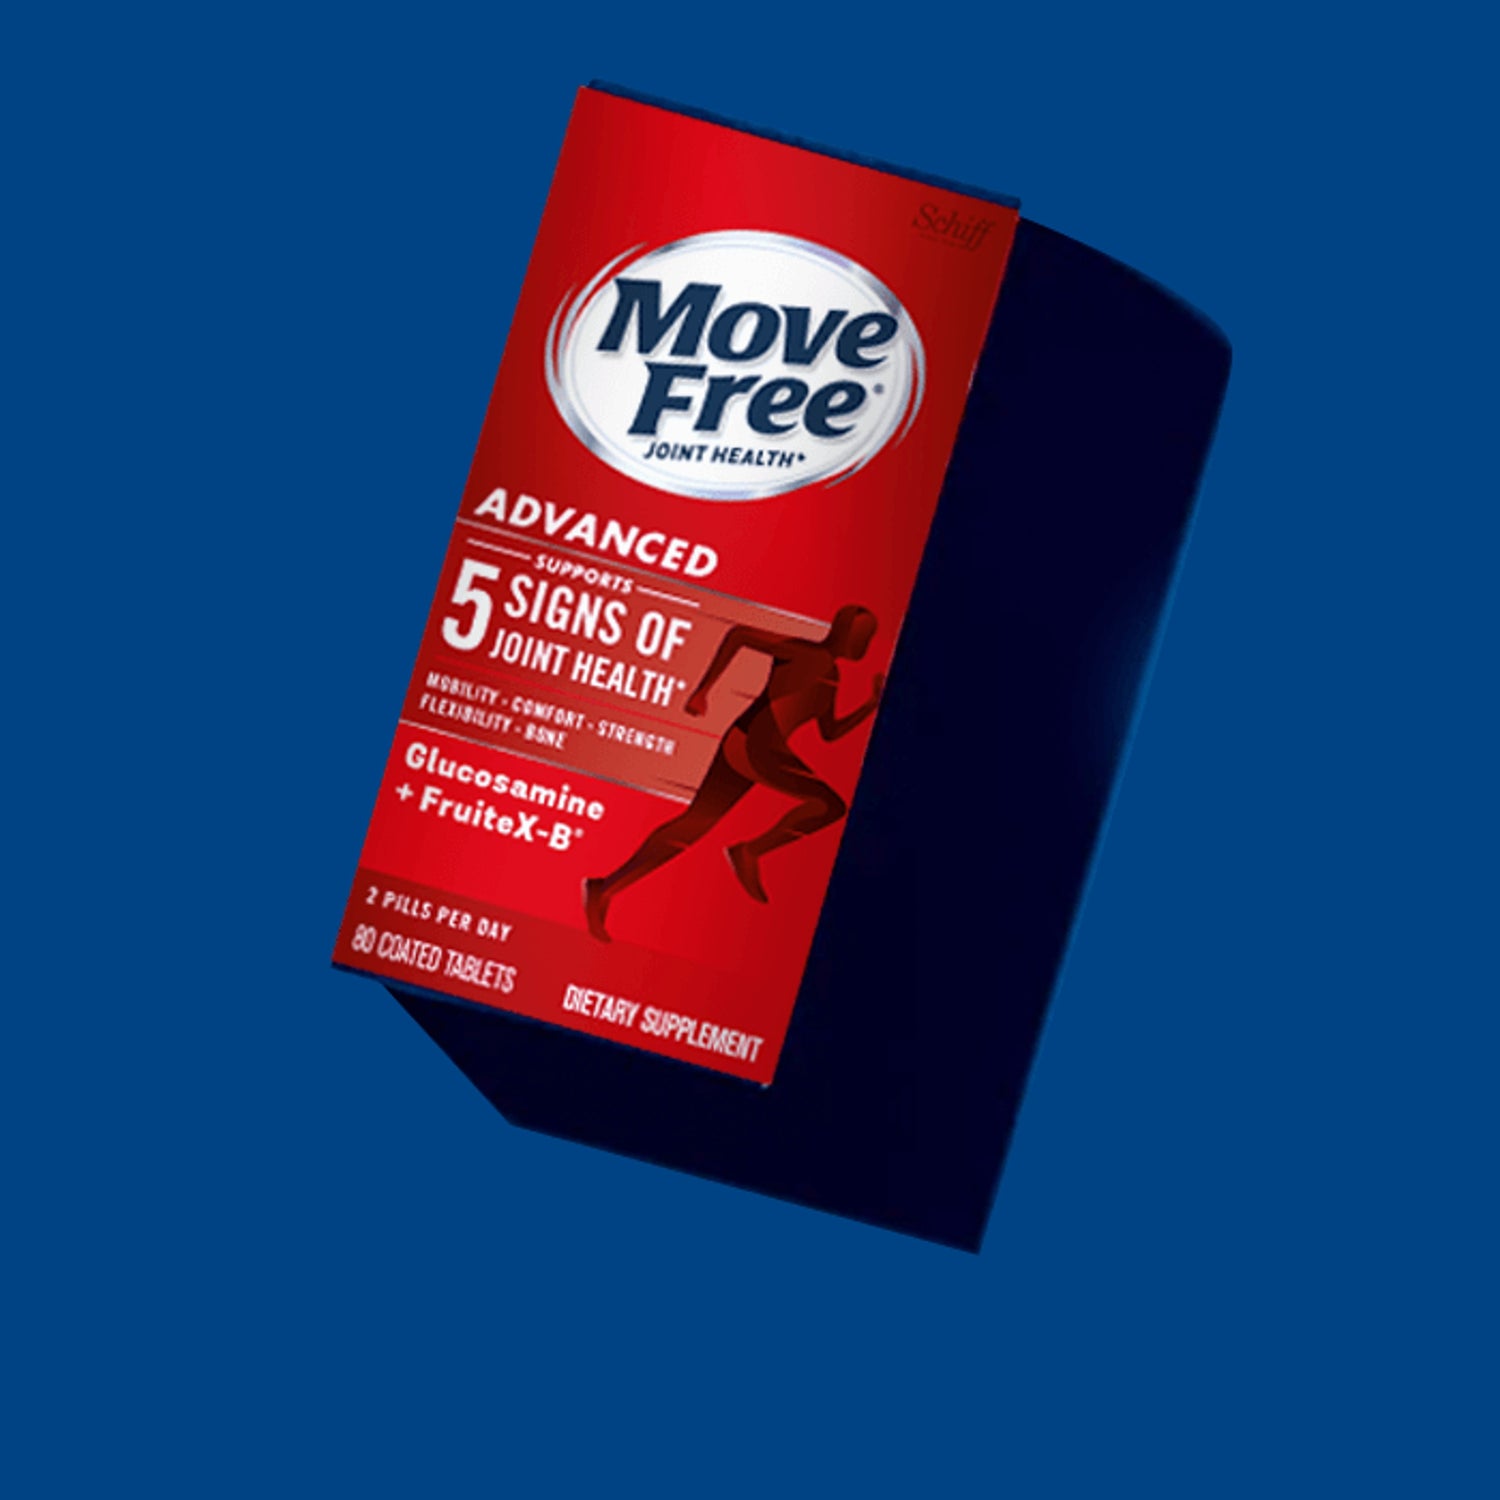 Move free advanced products